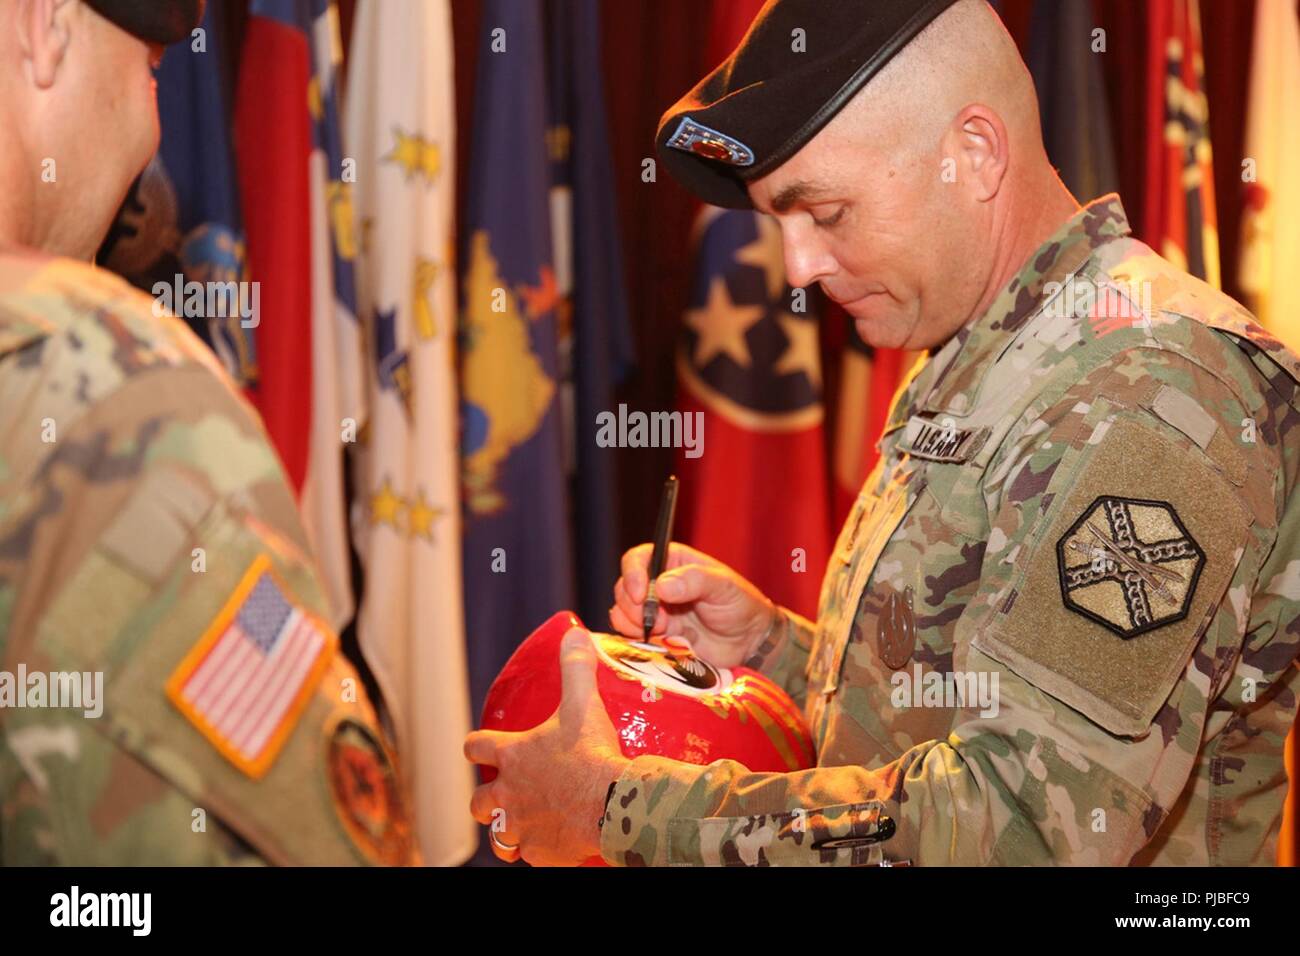 Command Sgt. Maj. Will Holland colors in the eye of a Japanese “Daruma” doll to symbolize the achievement of his goals as part of his relinquishment of responsibility ceremony July 11, 2018, at the Camp Zama Community Club. Holland is headed to Washington, D.C., to serve as a liaison between the U.S. Army and the U.S. Department of Education. Stock Photo